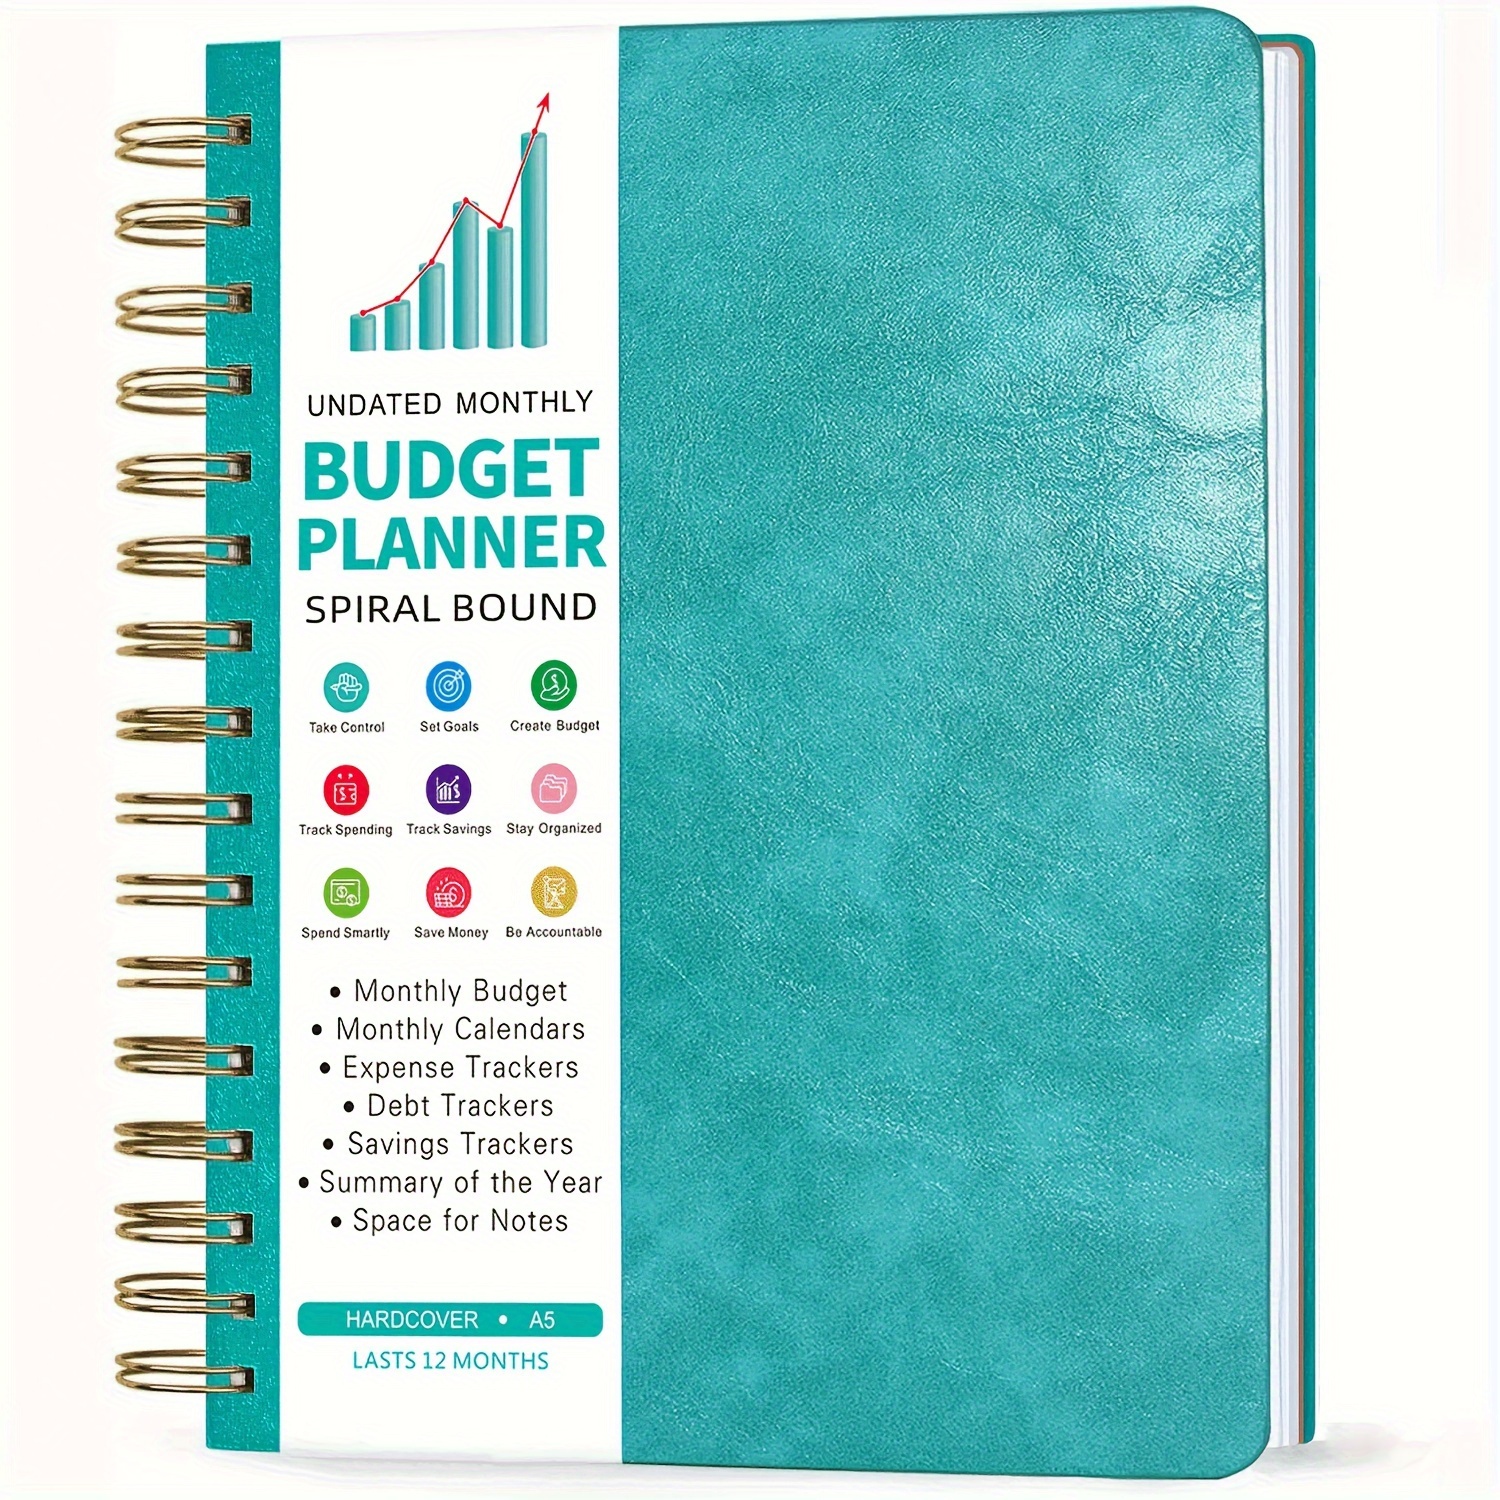 A5 Spiral - Bound Budget Planner. Savings Tracker, 72 Month-At-A-Glance  Pages and 4 Pages of Debt Trackers. 13 Tabs. 160 Pages of Thick 80 Lb.  Mohawk